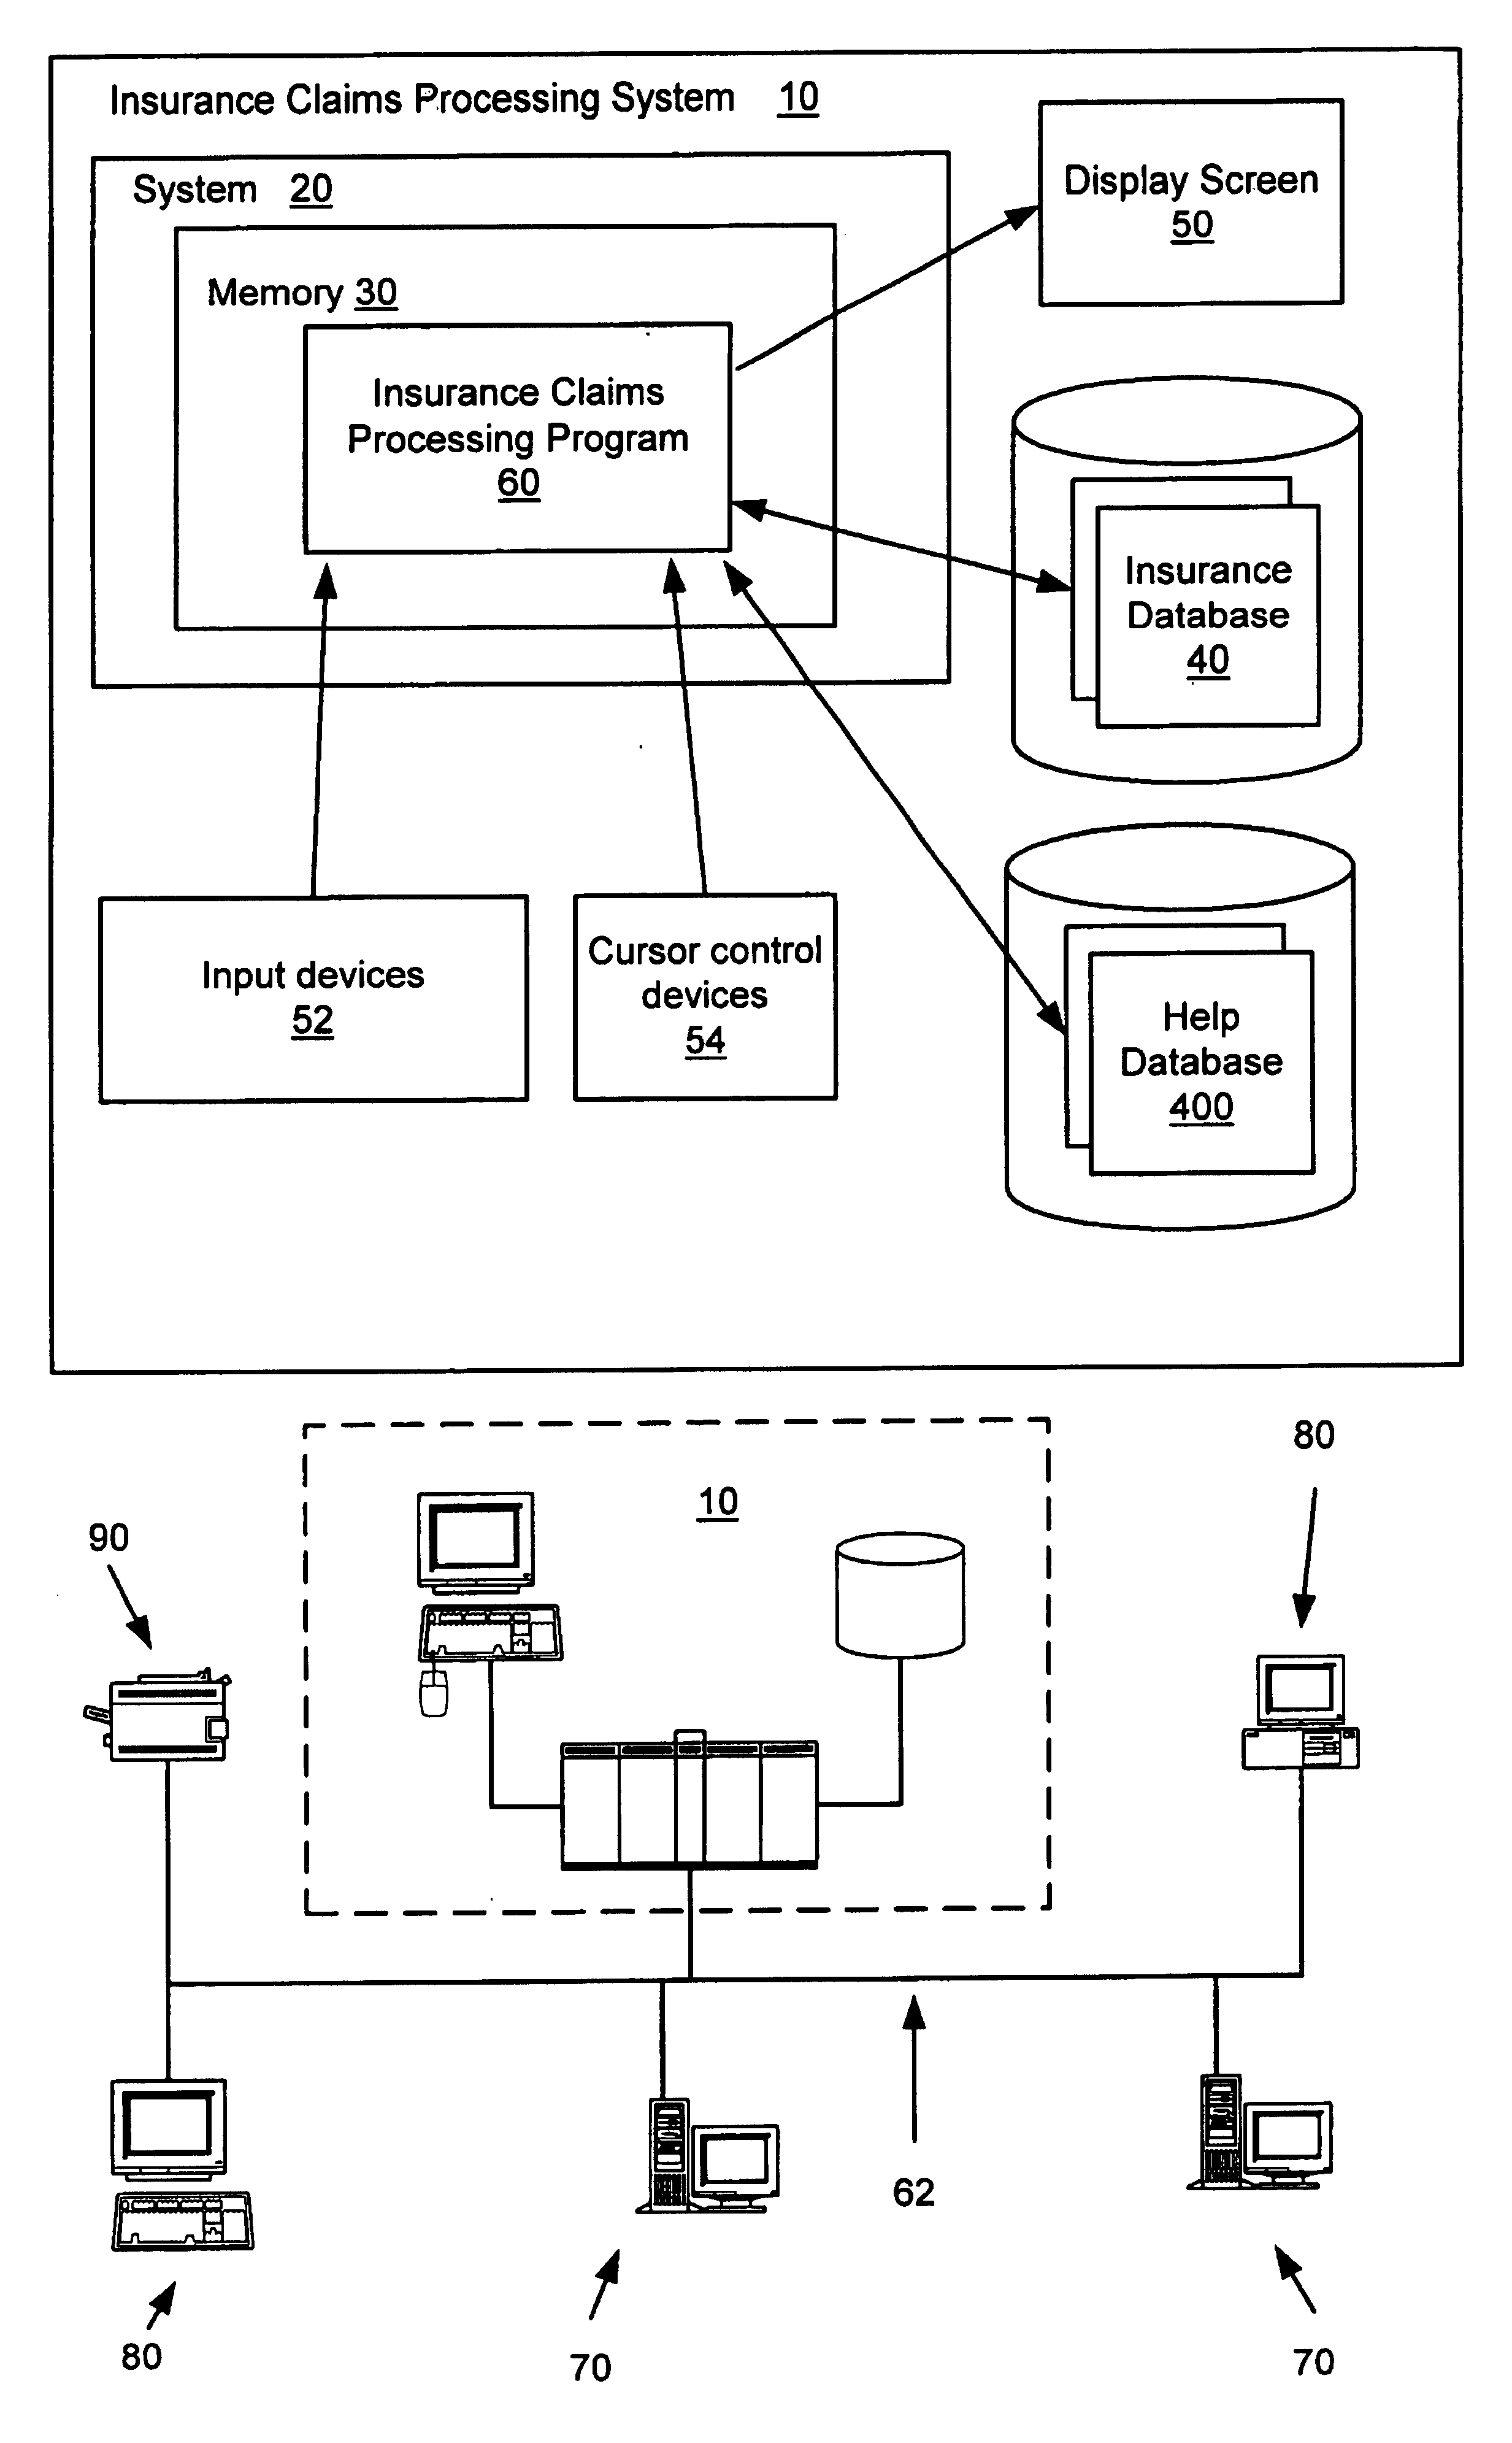 Graphical user interface with a hide/show feature for a reference system in an insurance claims processing system